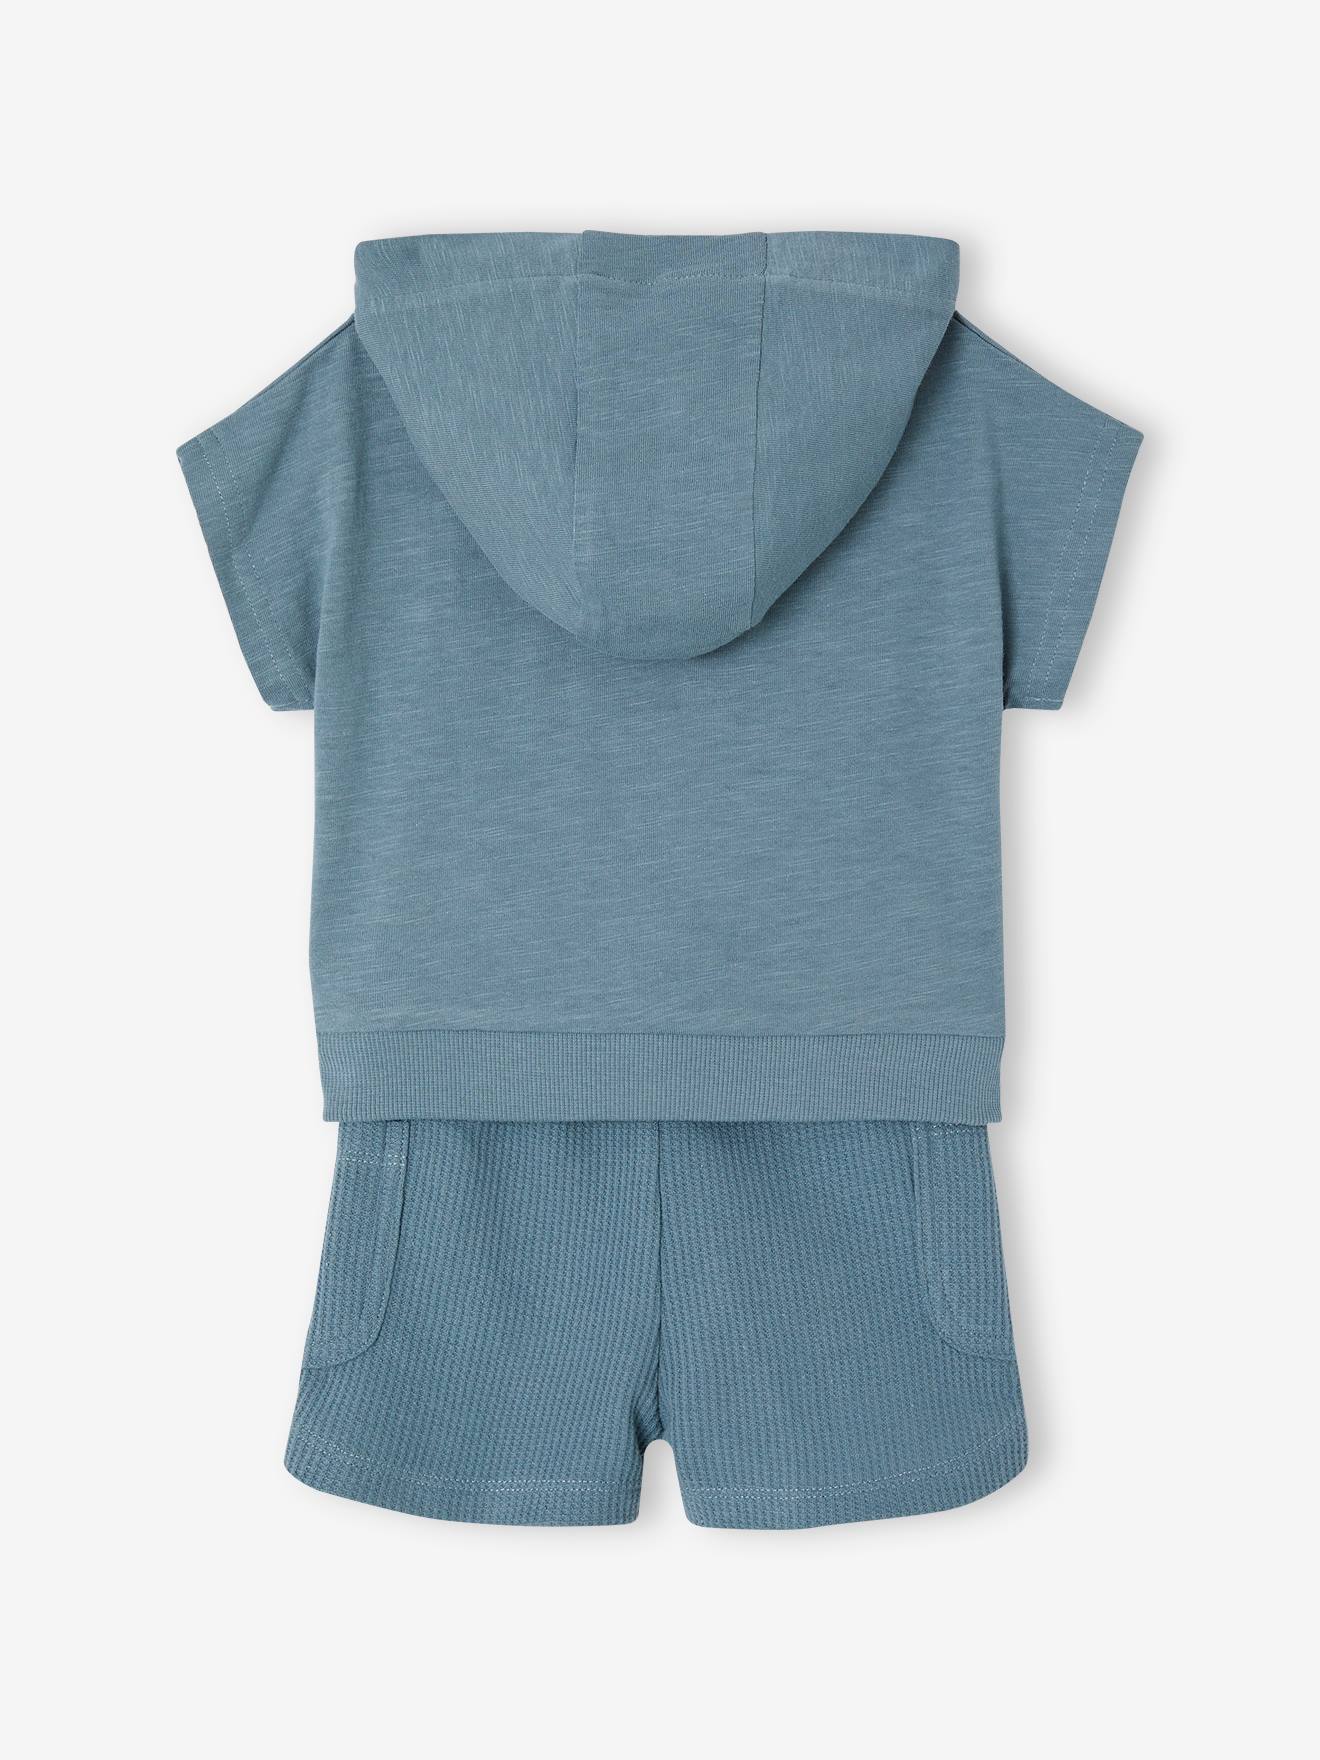 Hoodie & Honeycomb Shorts Combo for Babies - peacock blue, Baby